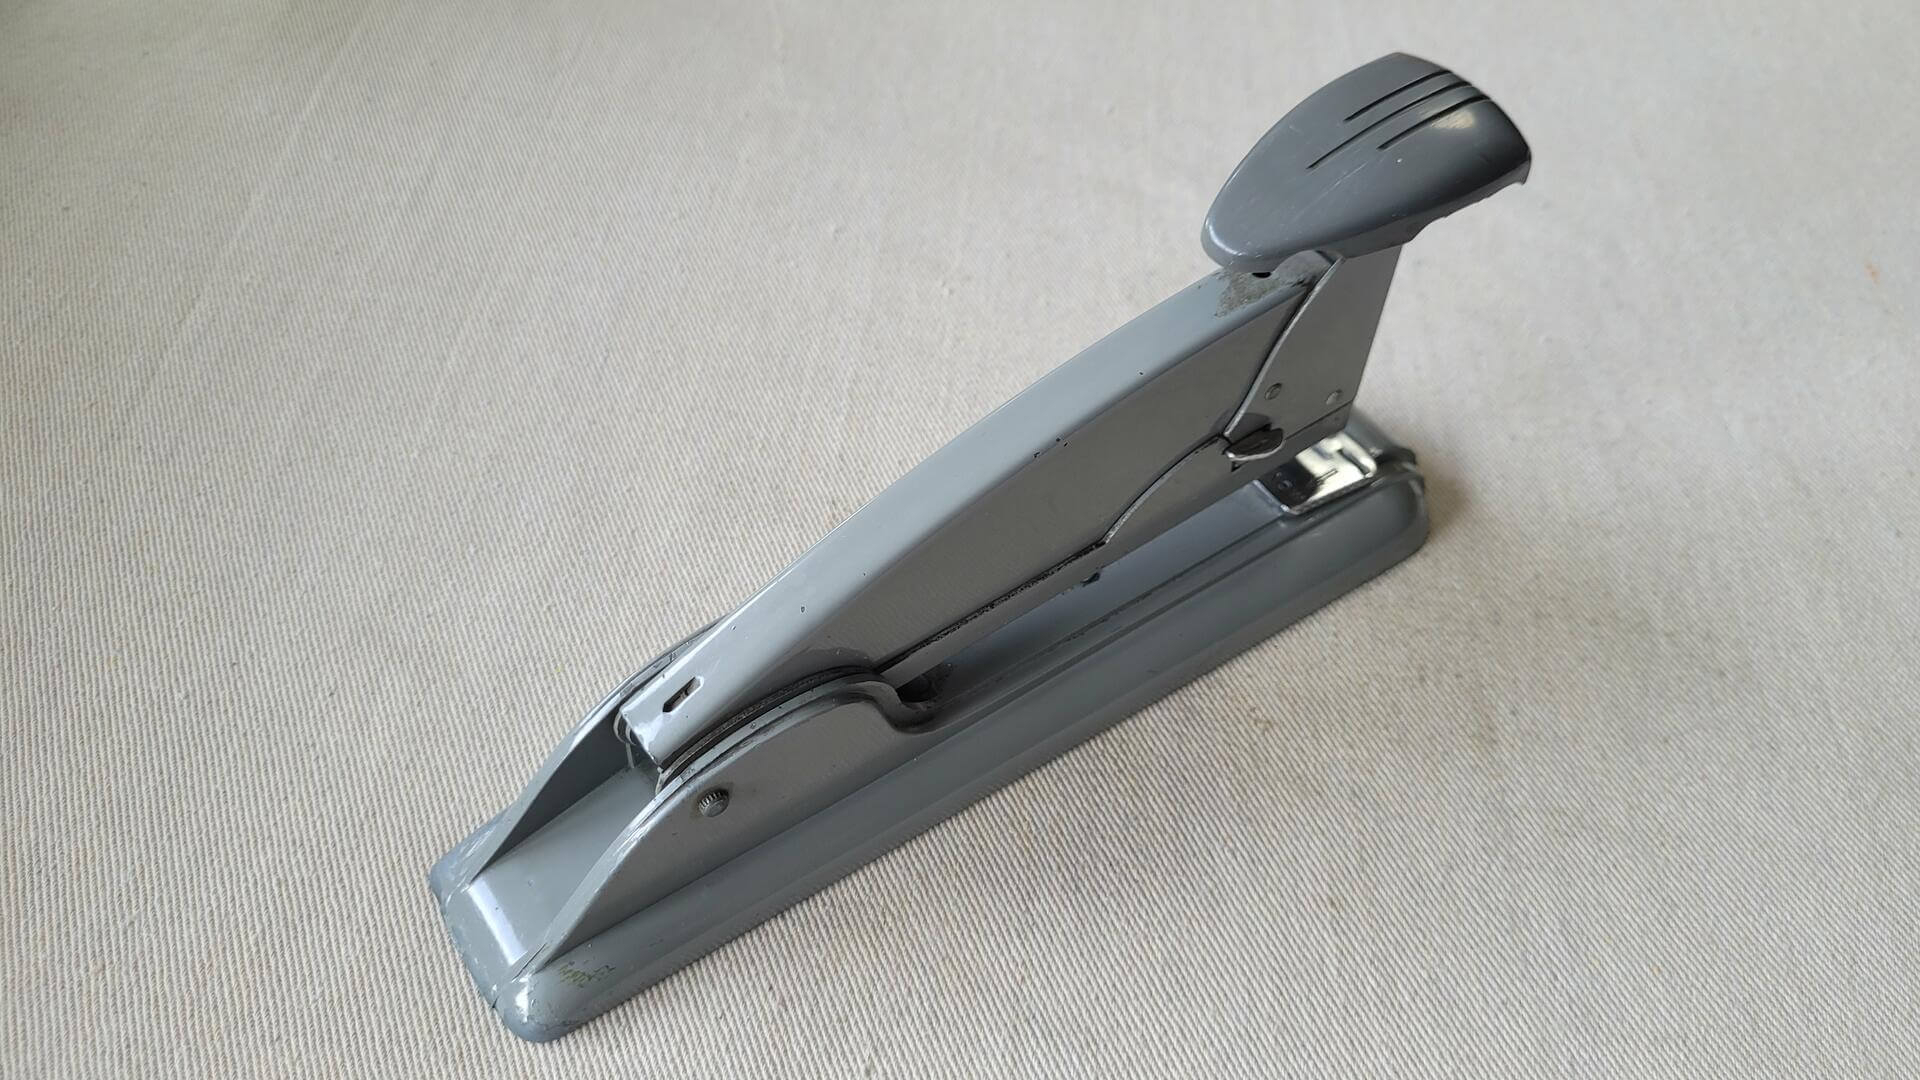 swingline-speed-stapler-no-4-battleship-grey-long-island-ny-antique-vintage-made-in-usa-collectible-office-equipment-stationary-art-deco-design